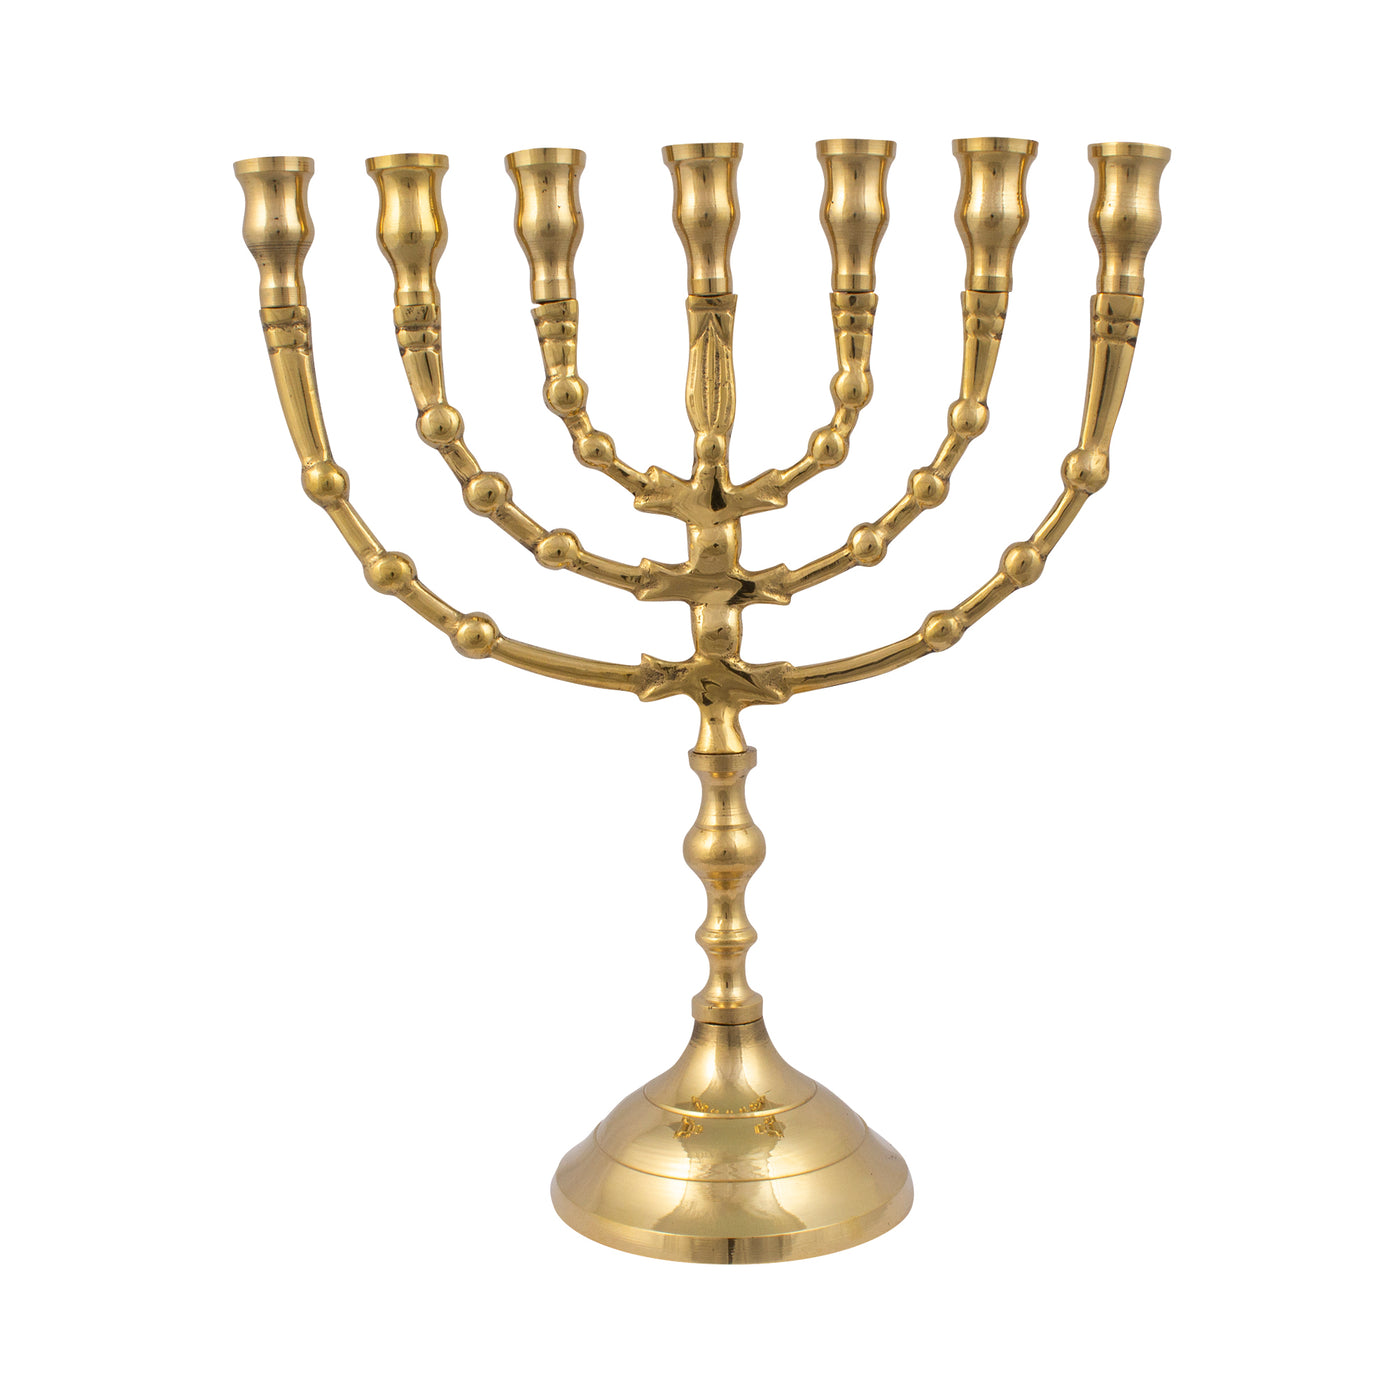 Menorah decorated with balls and a shiny brass finish  9 inch / 23 cm